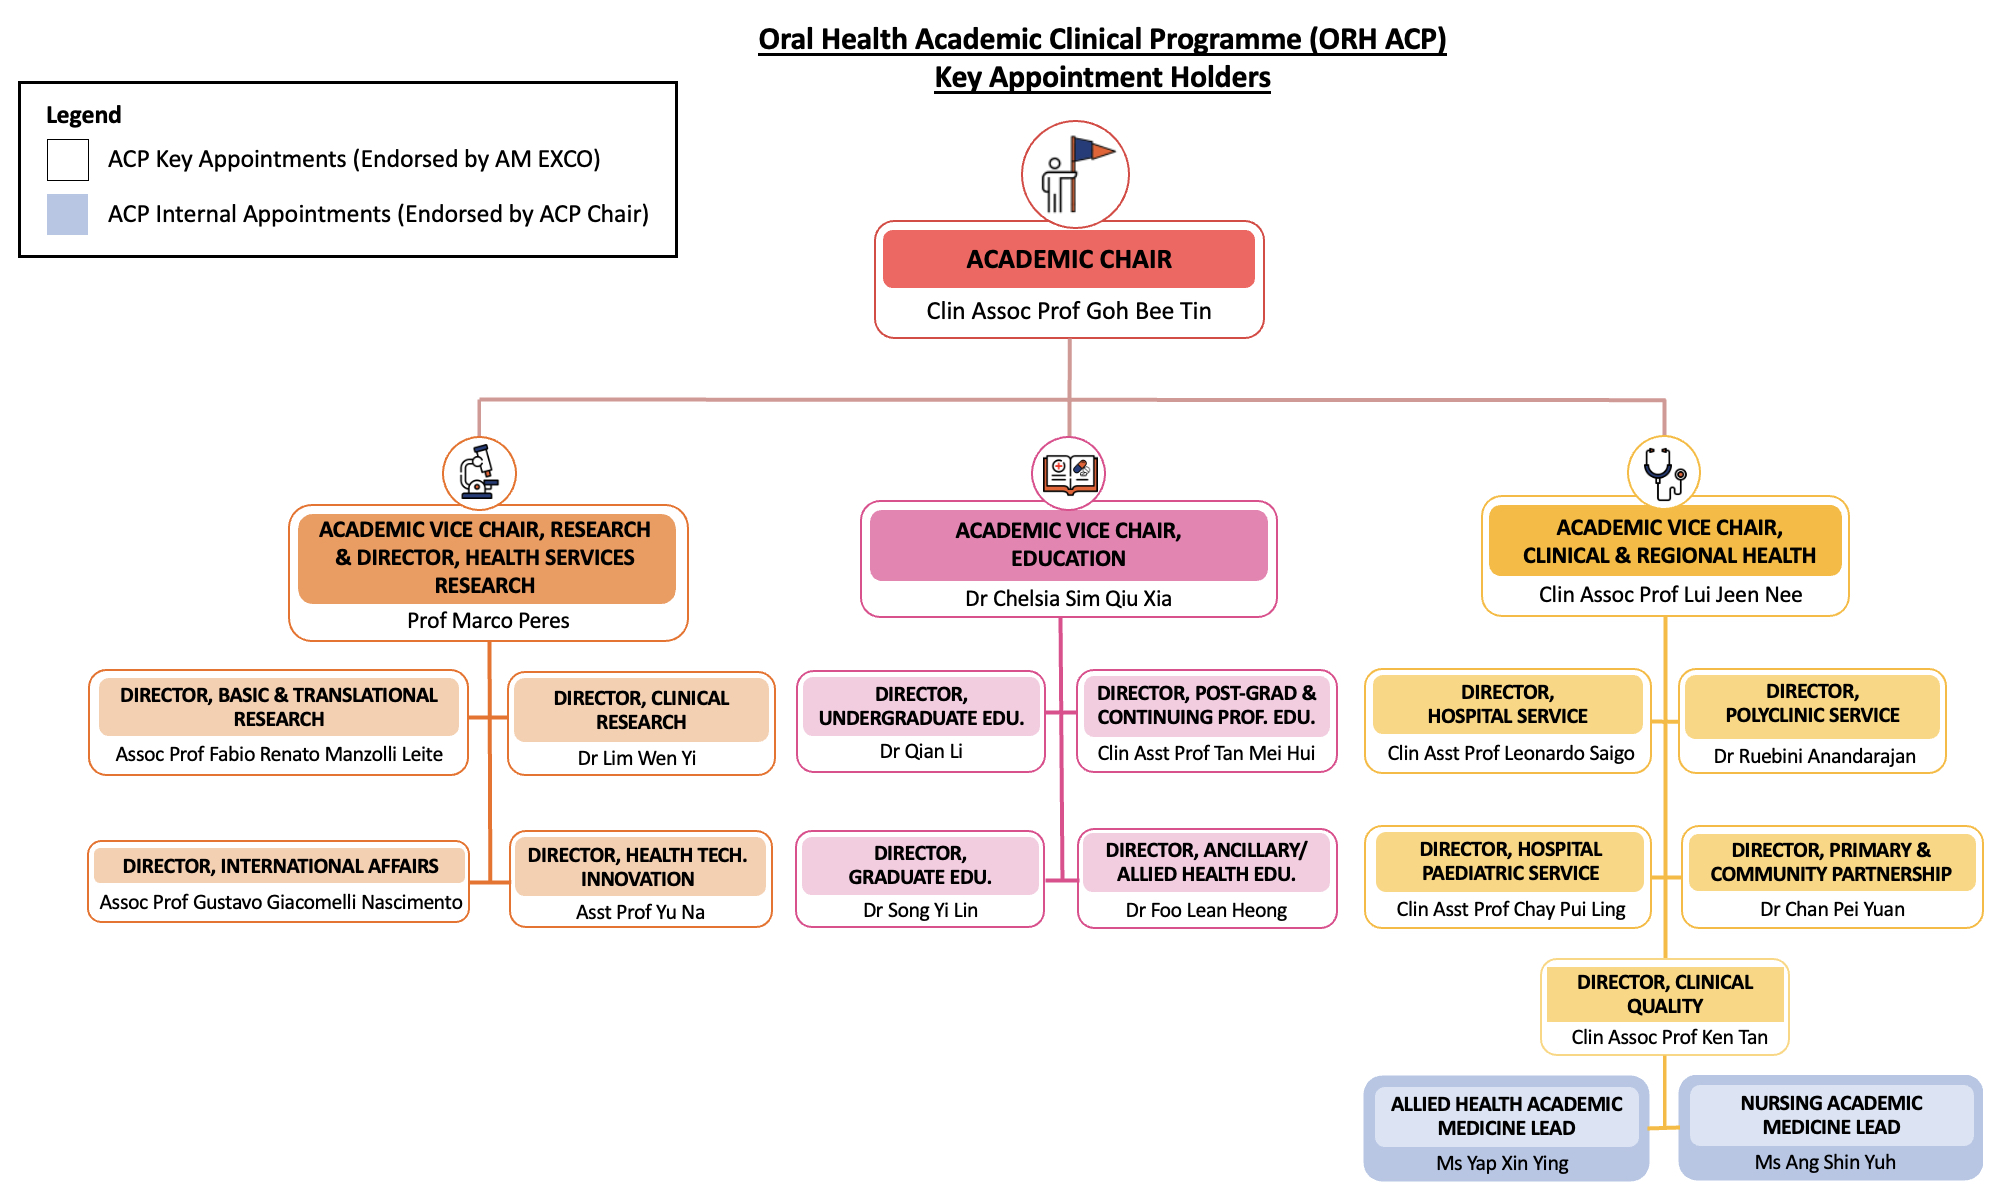 ORH ACP Org Chart as of 1 Aug 2023 (for ACP Page).jpg